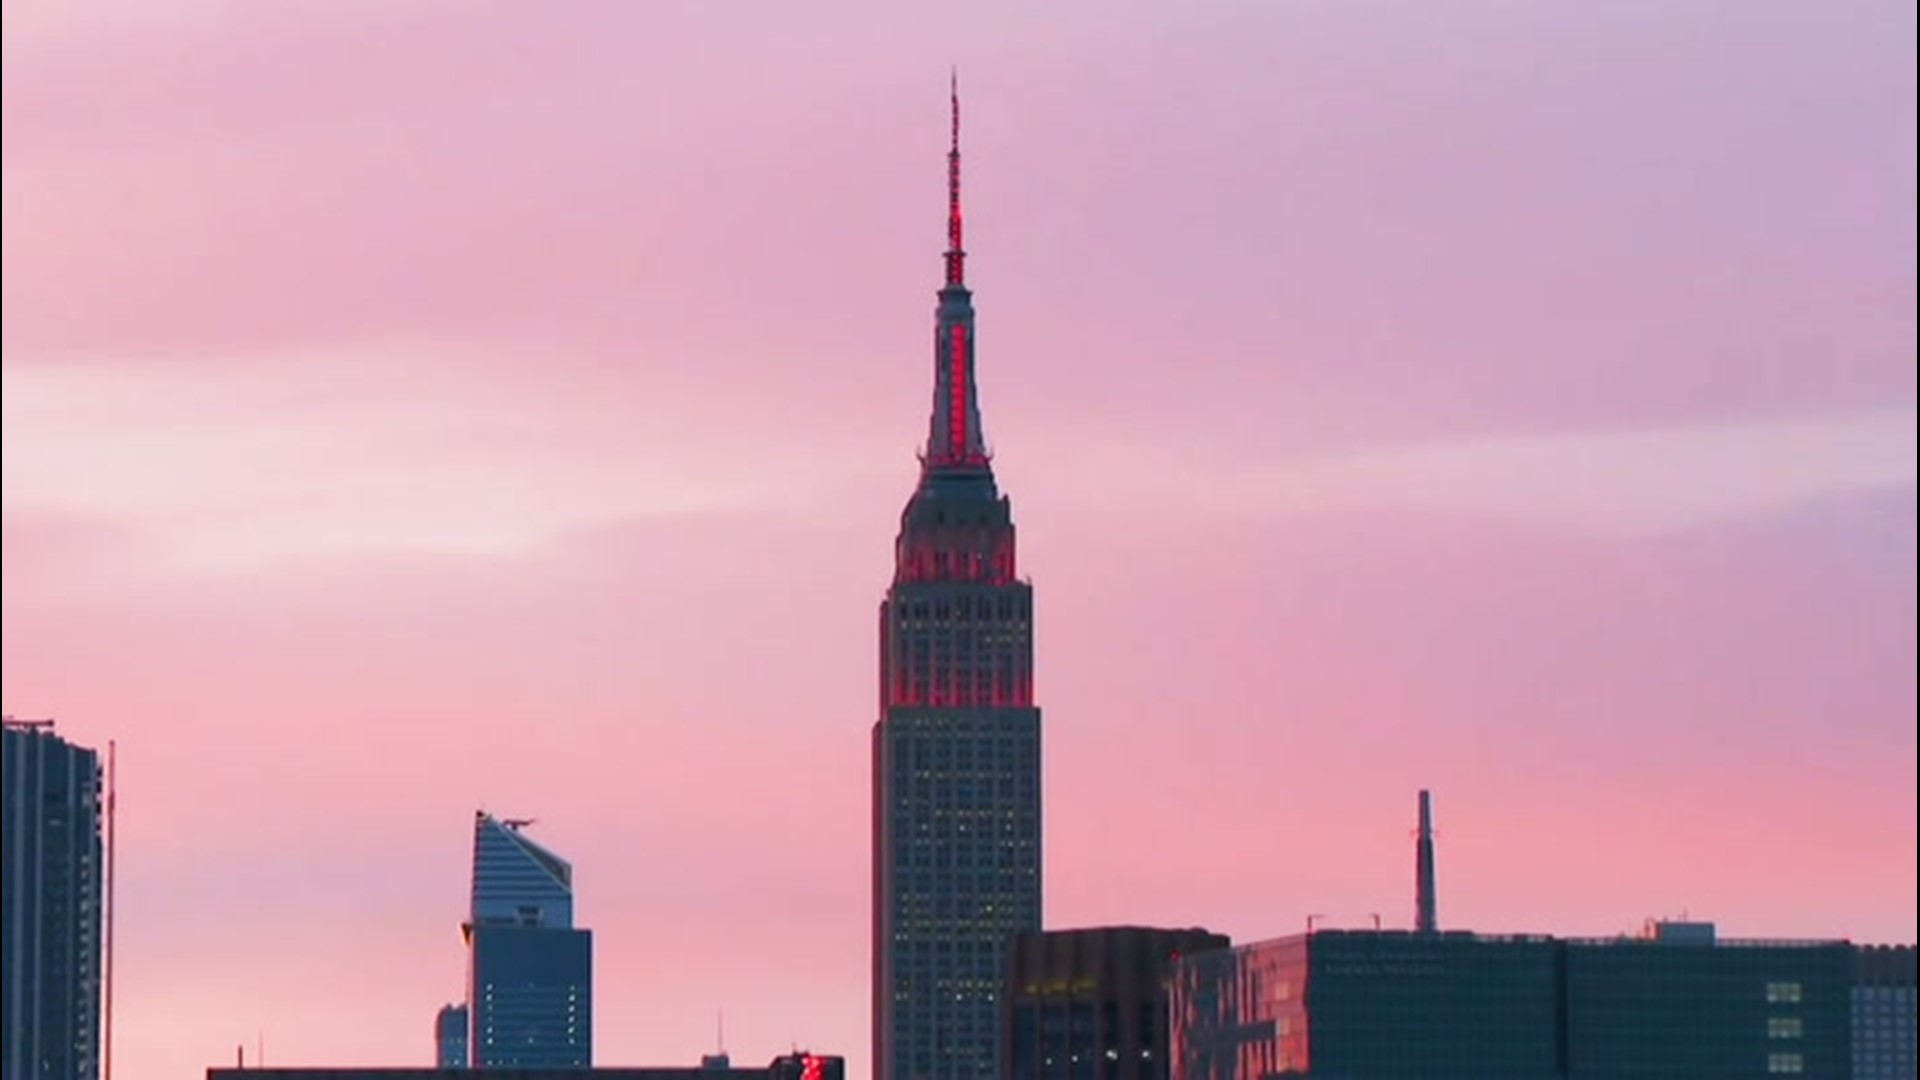 The Empire State Building in New York, New York, was lit up in red and white colors on April 2 in honor of healthcare workers battling COVID-19.